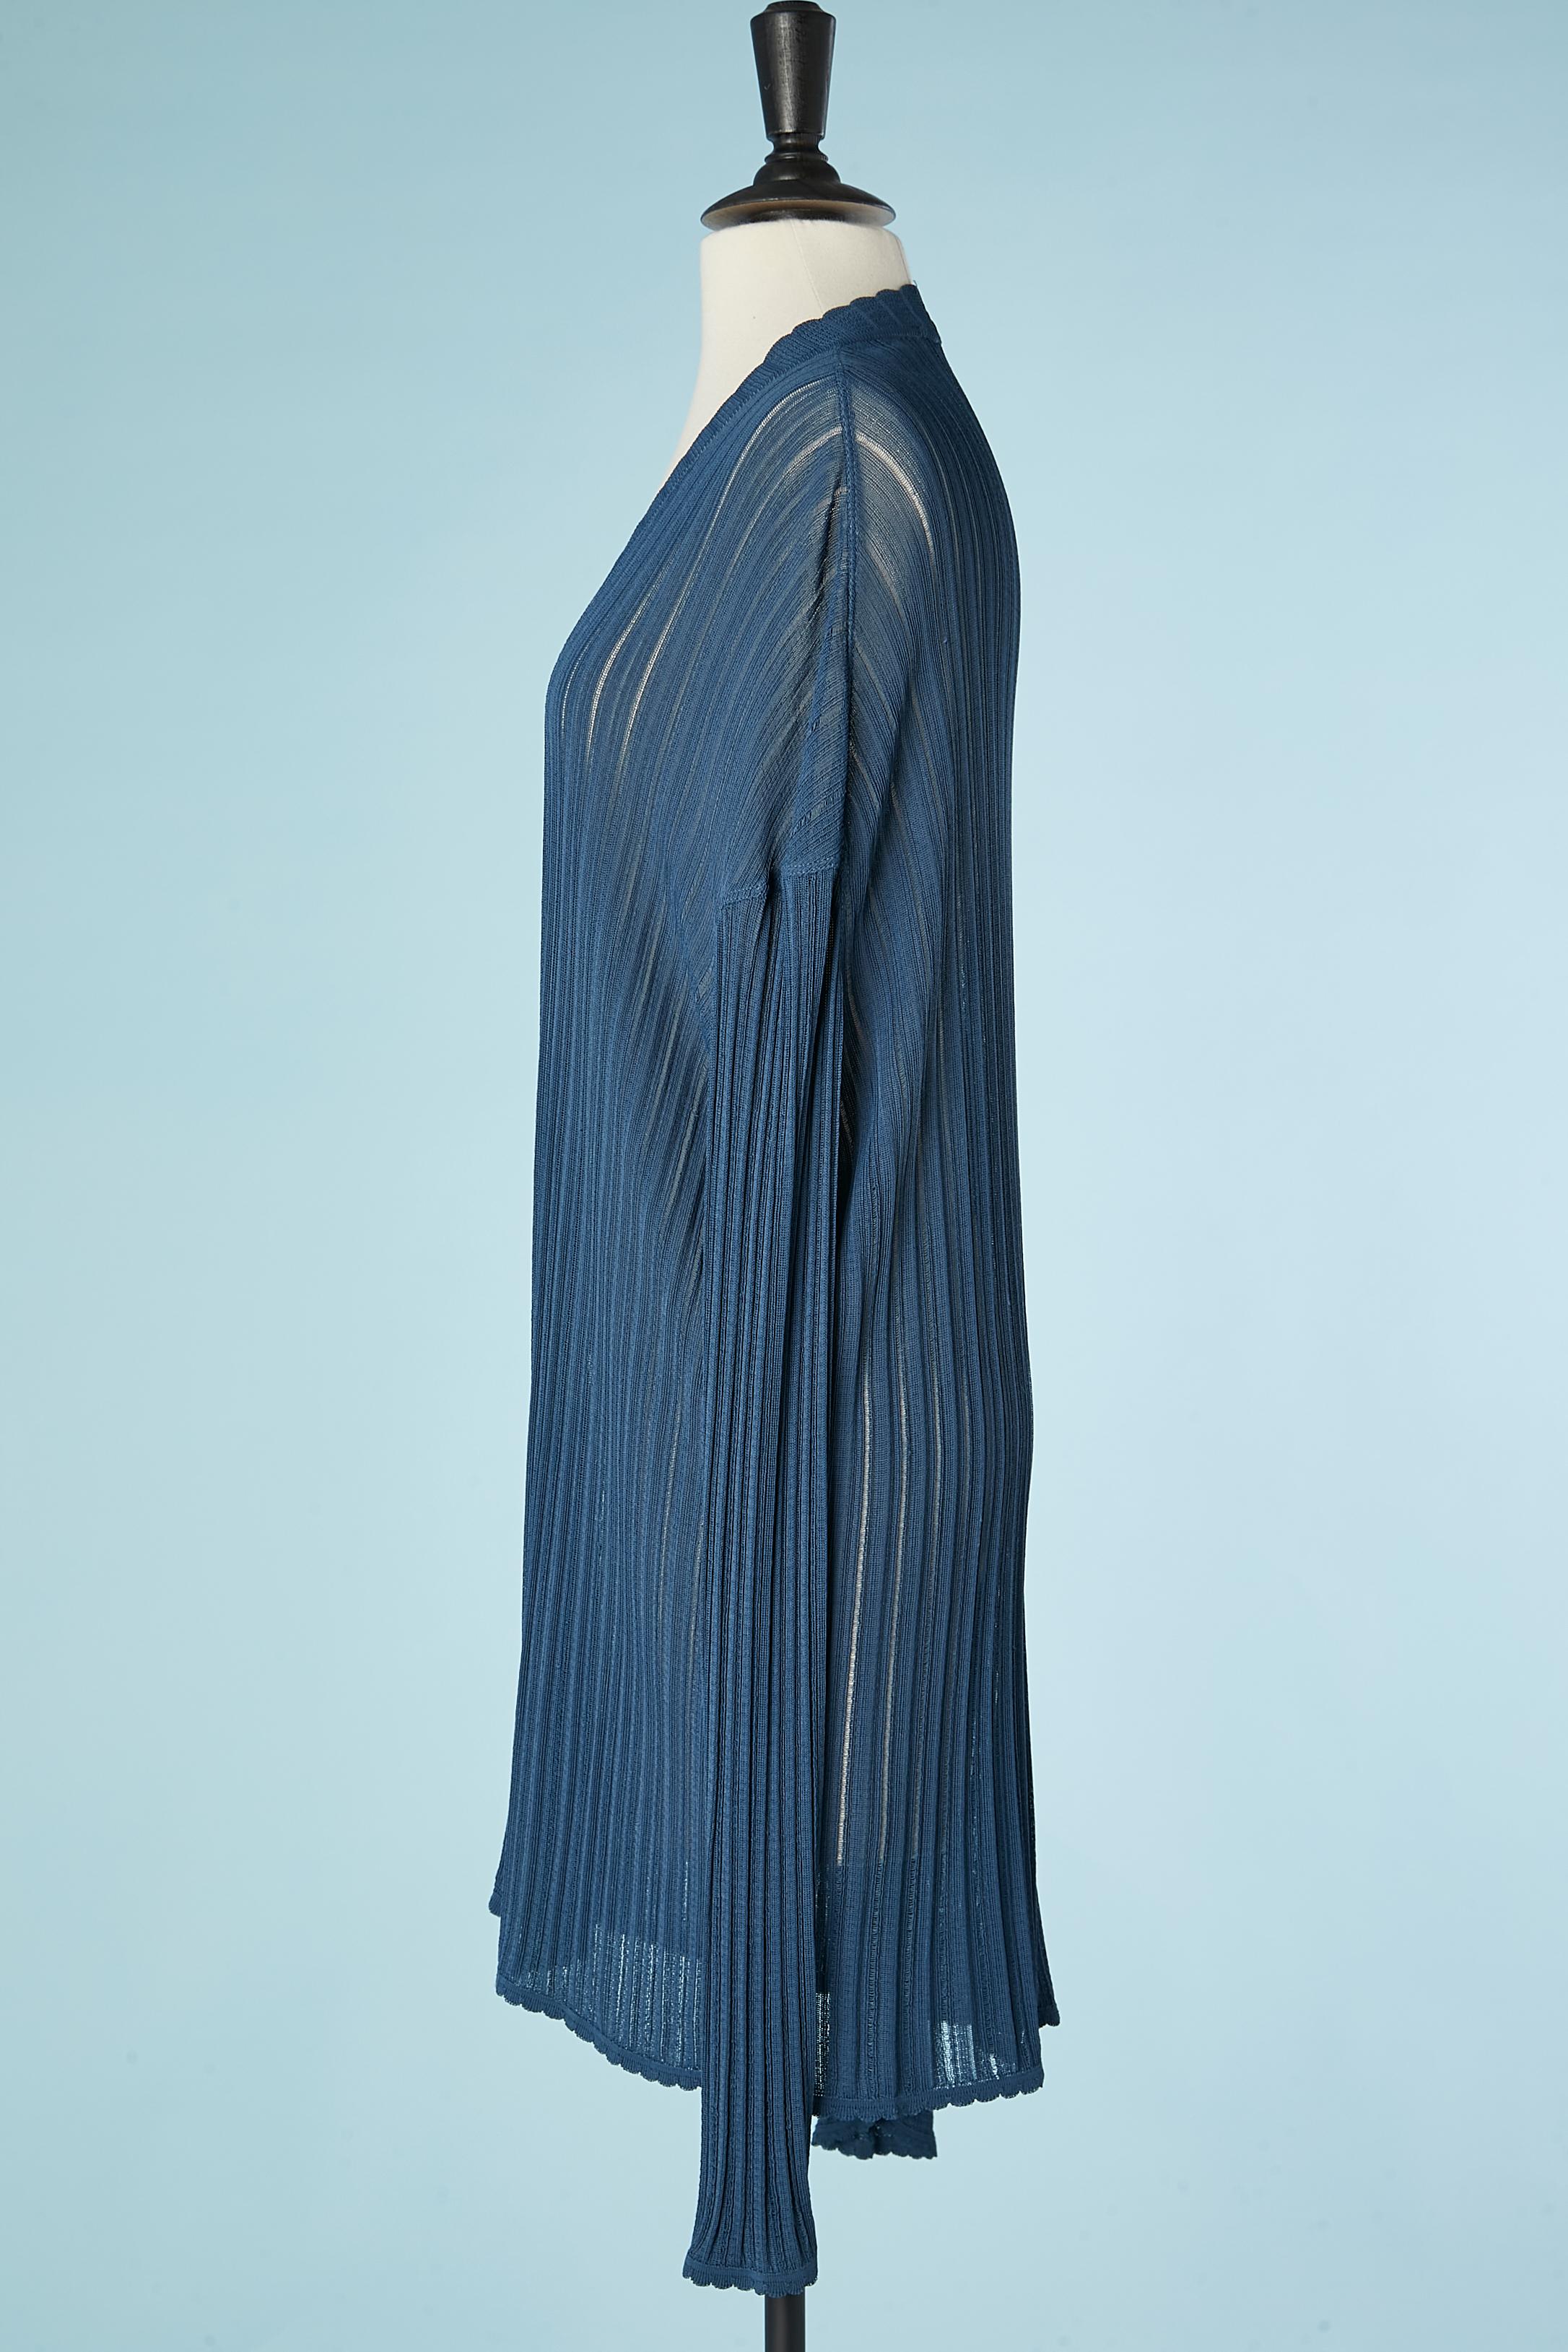 Blue ribbed edge to edge cardigan in rayon knit AlaÏa  In Excellent Condition For Sale In Saint-Ouen-Sur-Seine, FR